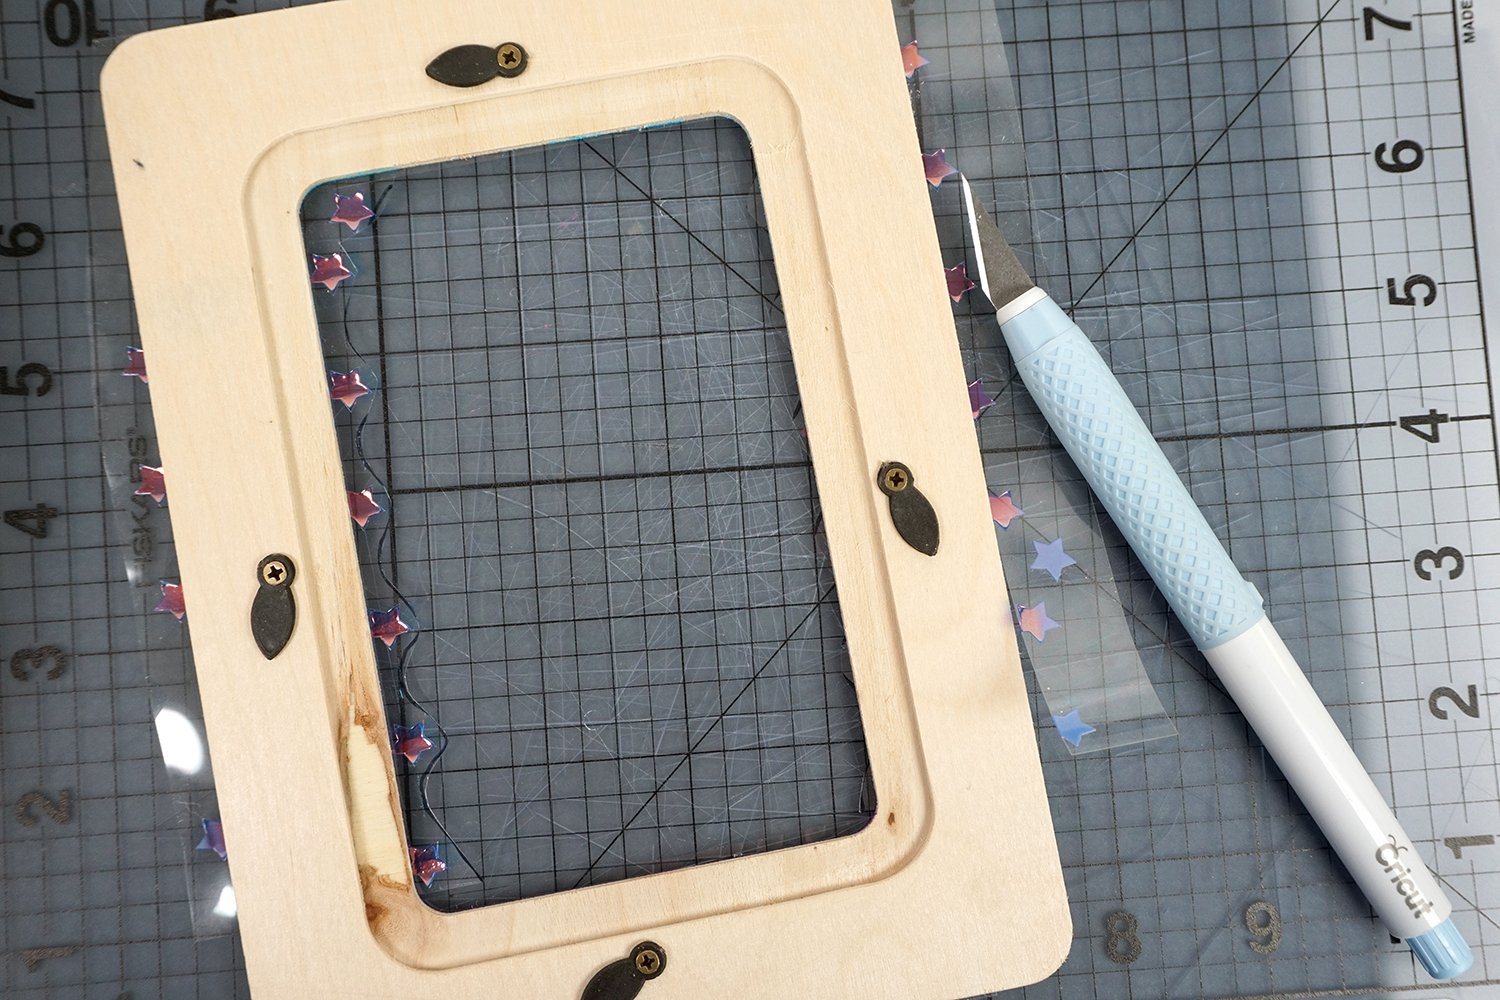 using cricut cutting tool to cut excess material on photo frame